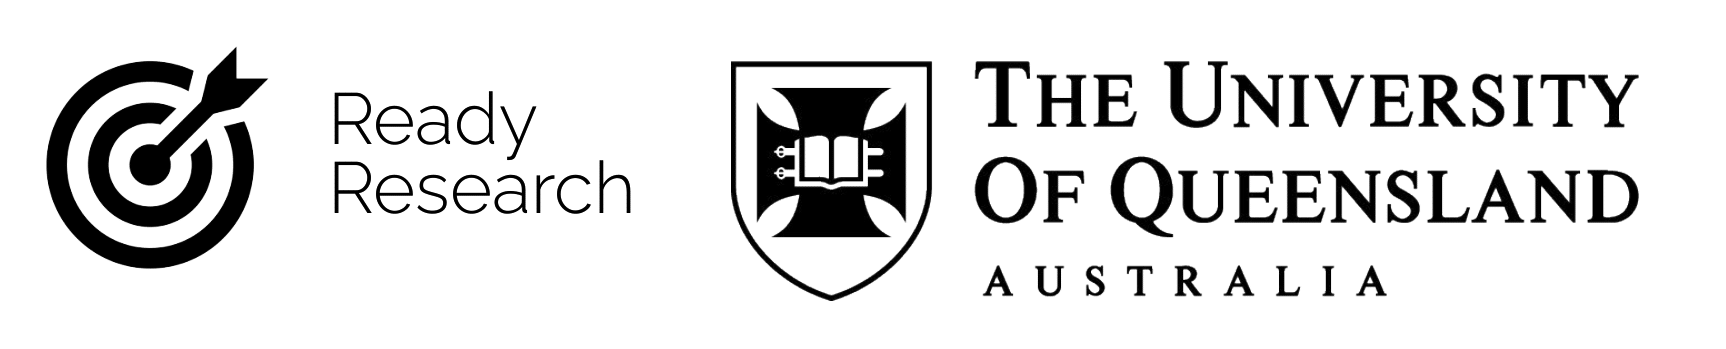 Ready Research & The University of Queensland logo